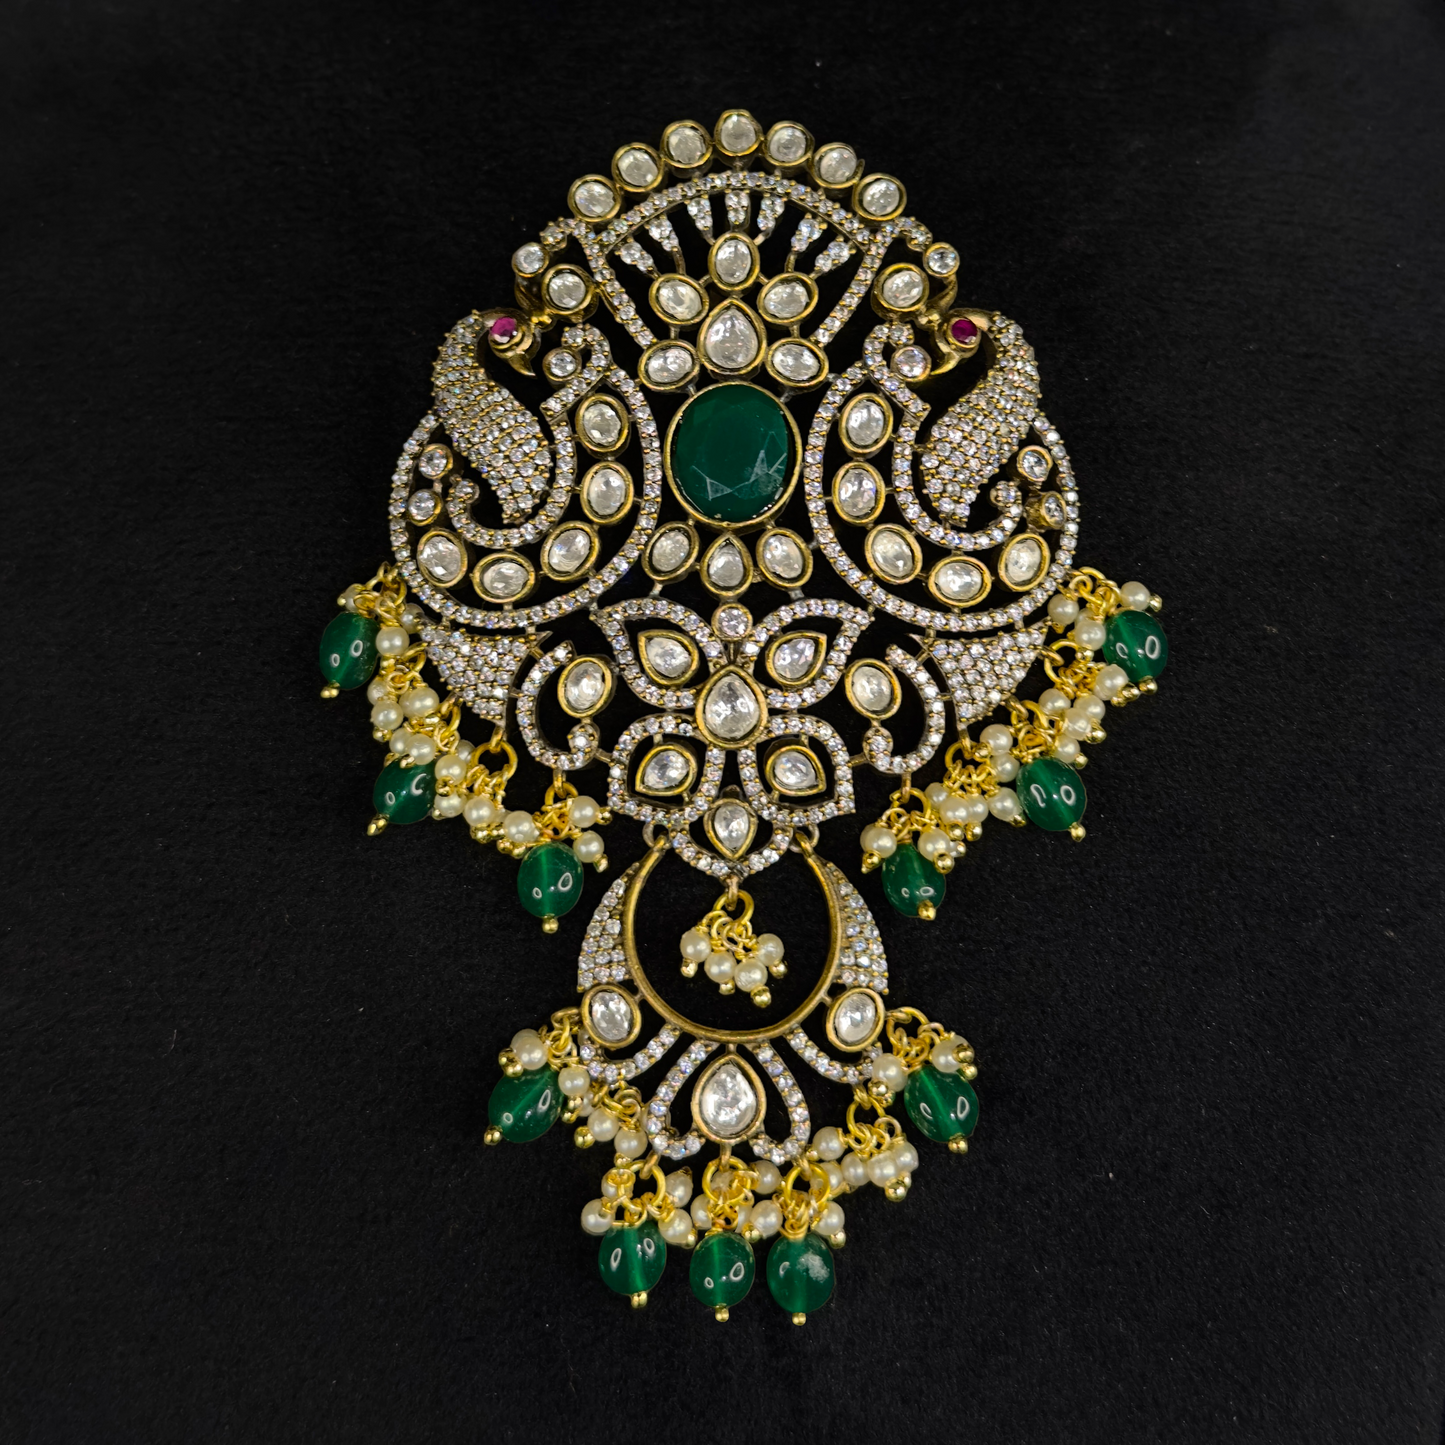 Heritage Victorian Pendant with Peacock motif and Earrings